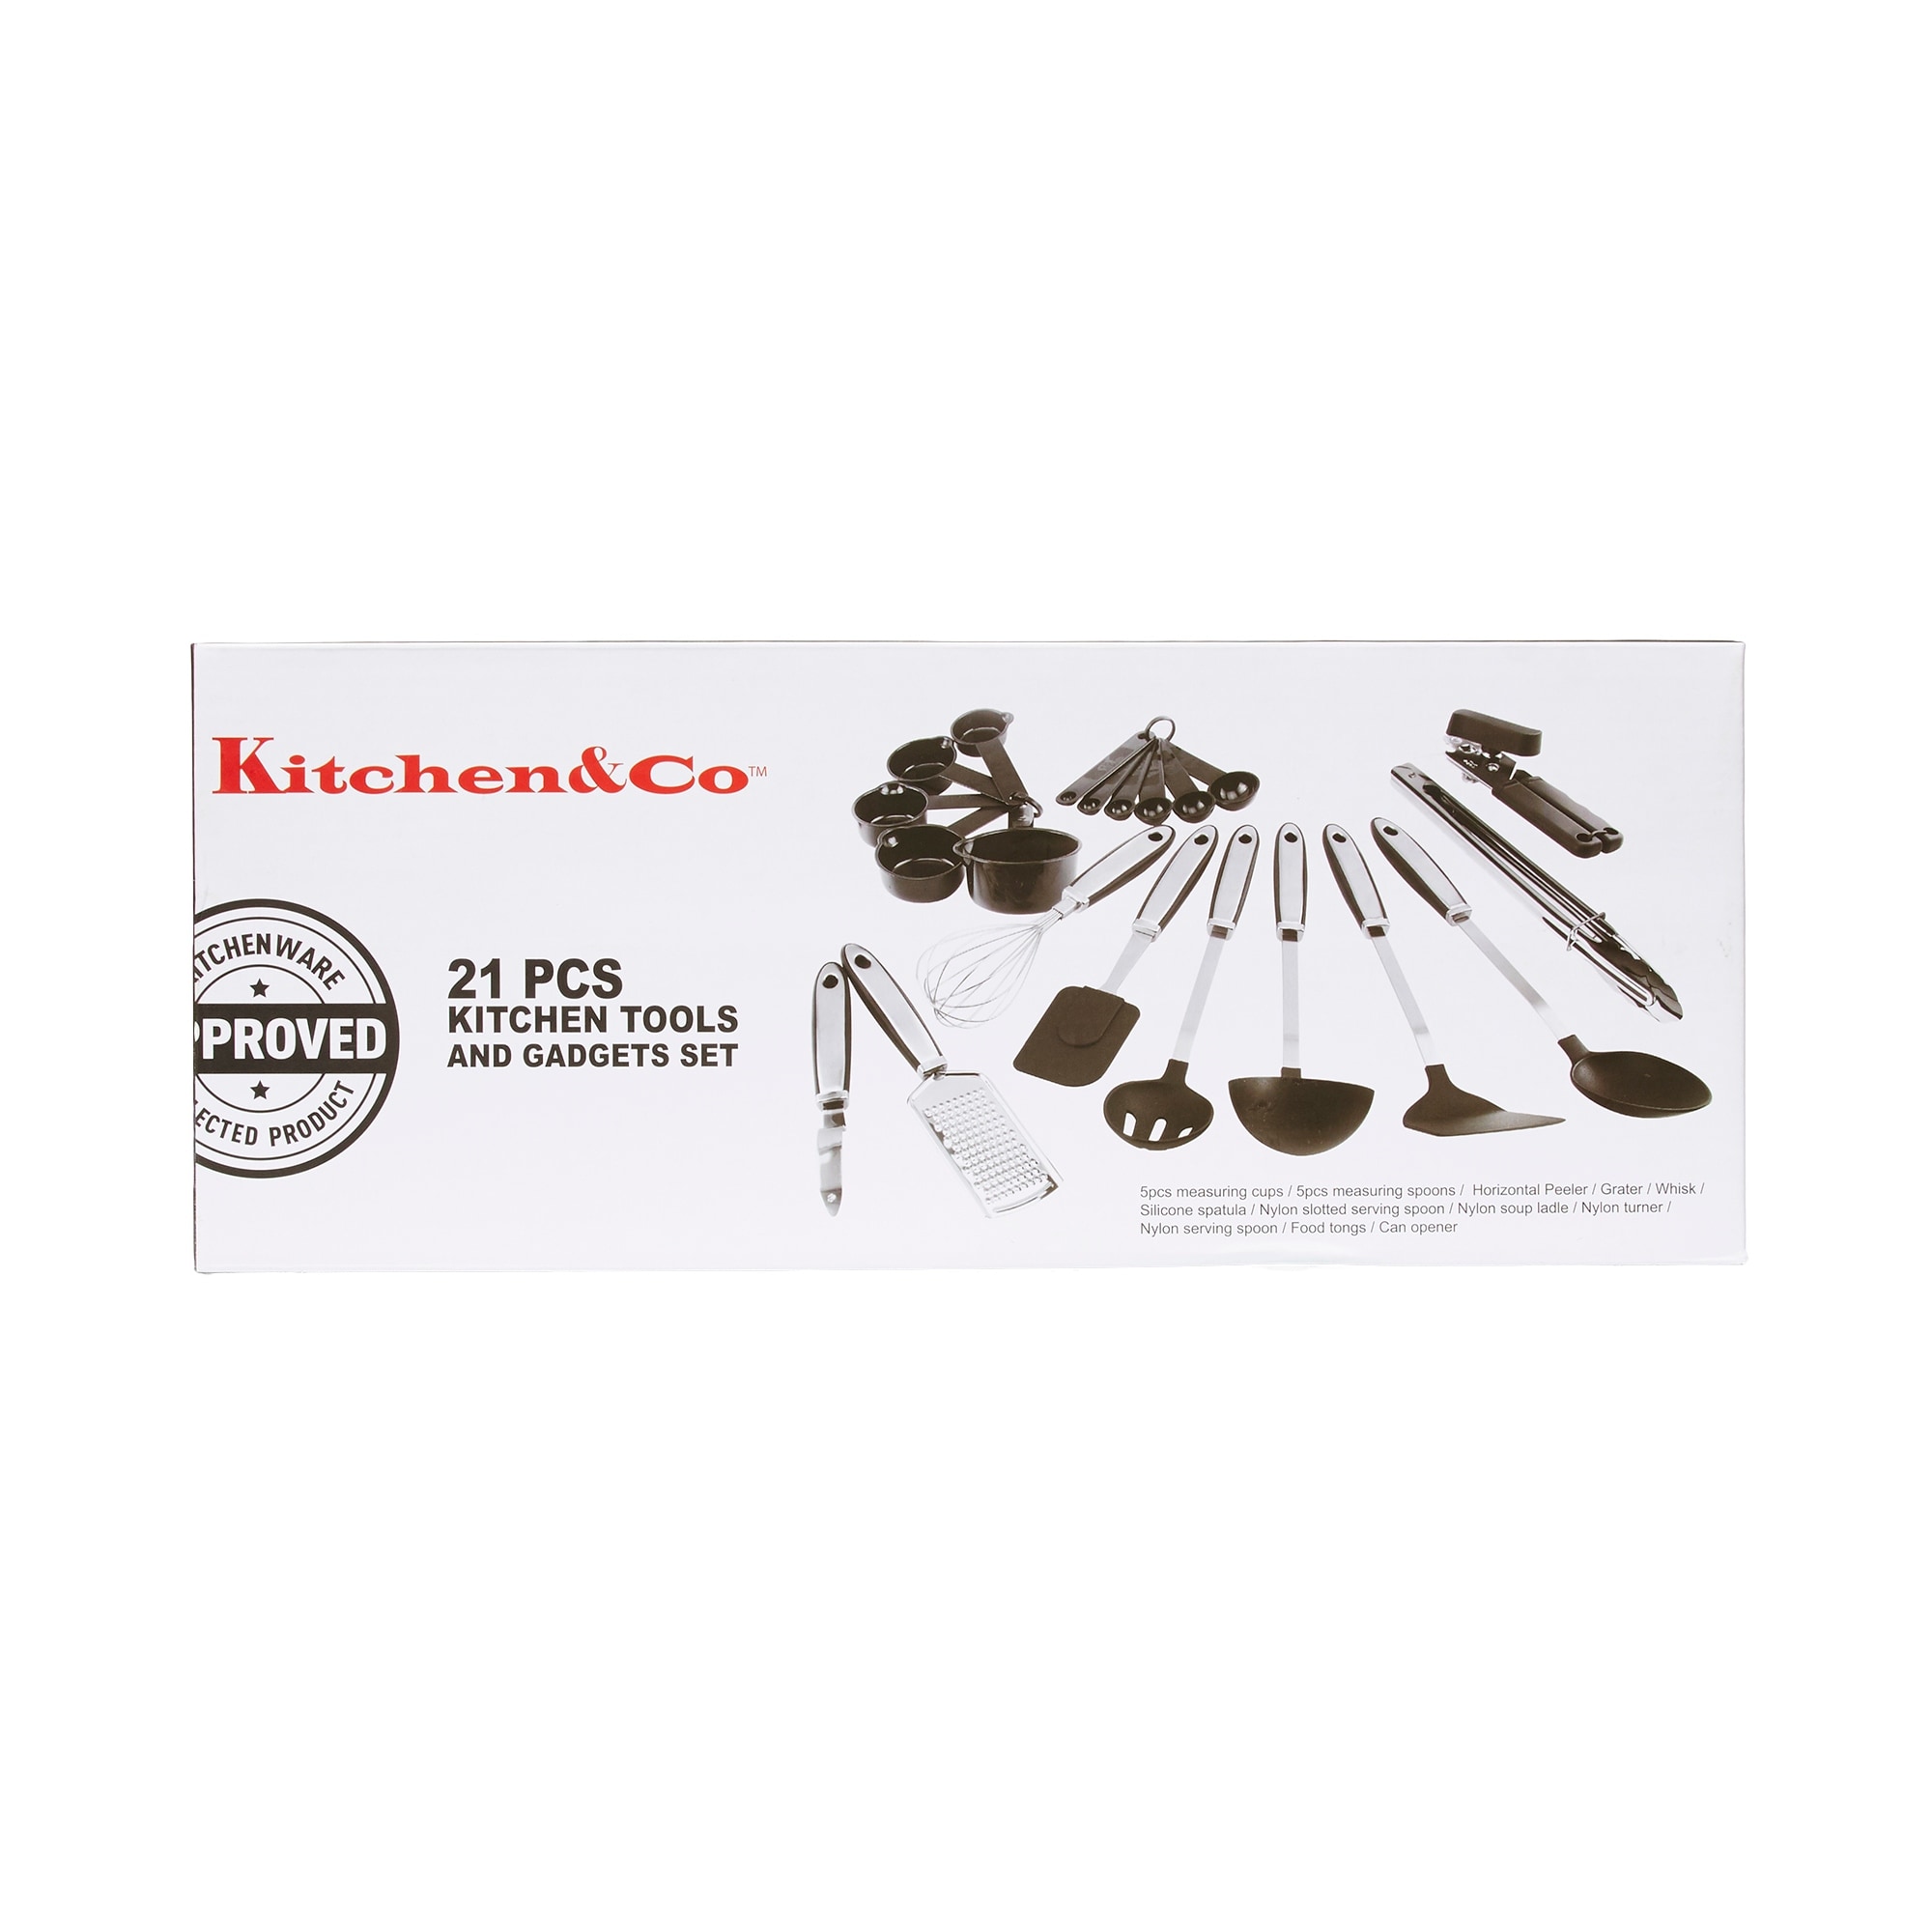 Kitchen&Co. 21 pc Stainless Steal with Soft Rubber Handle Kitchen Gadgets Set